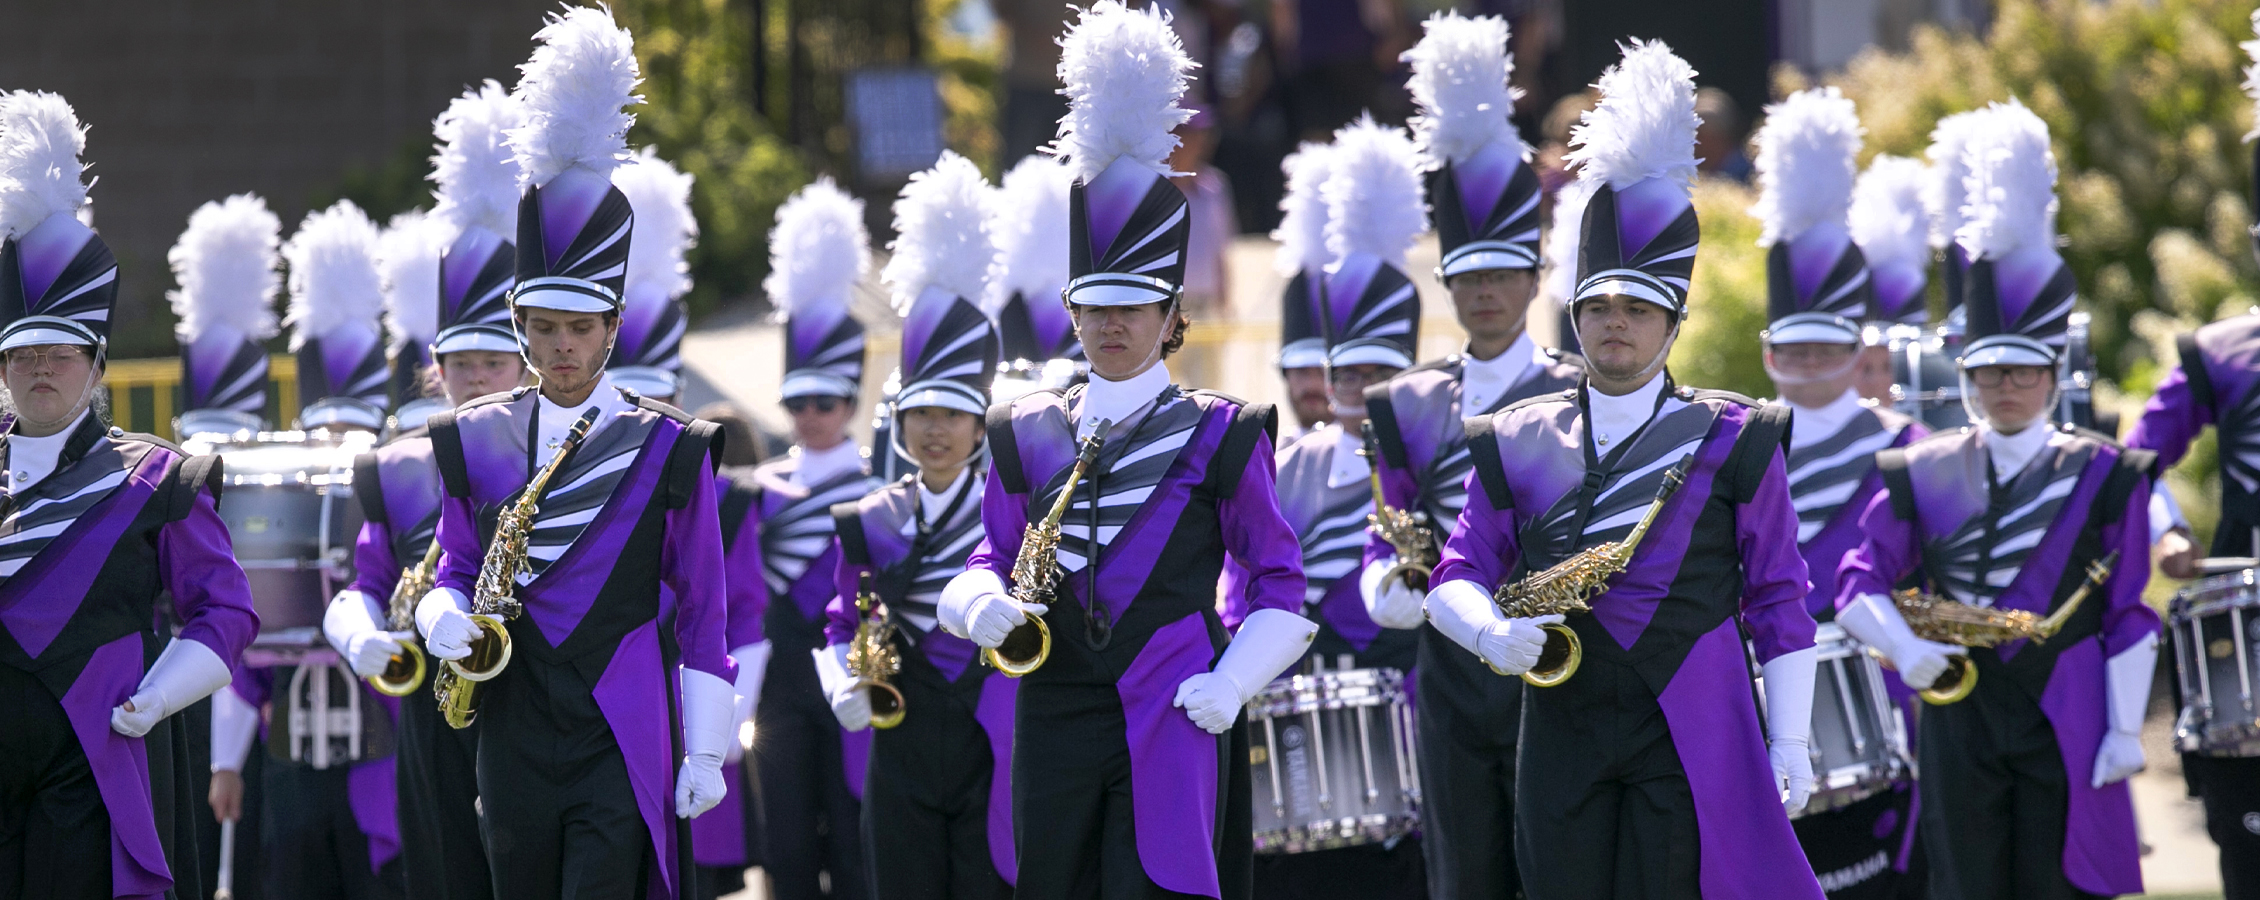 The Marching Band stands at attention in full uniform.